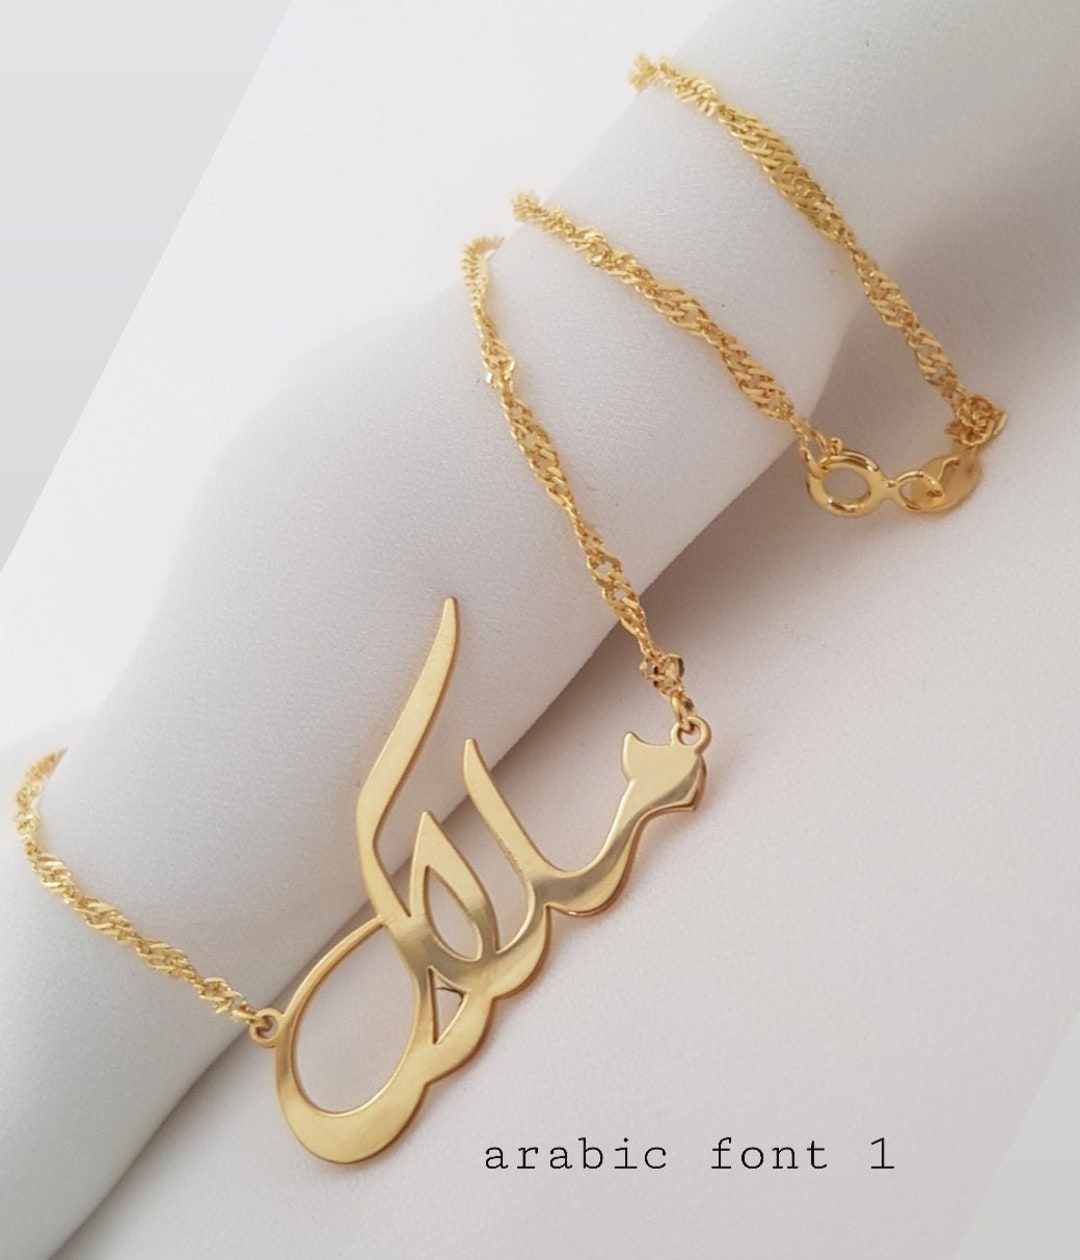 Arabic Name Necklace - Cursive Name Necklace in Arabic